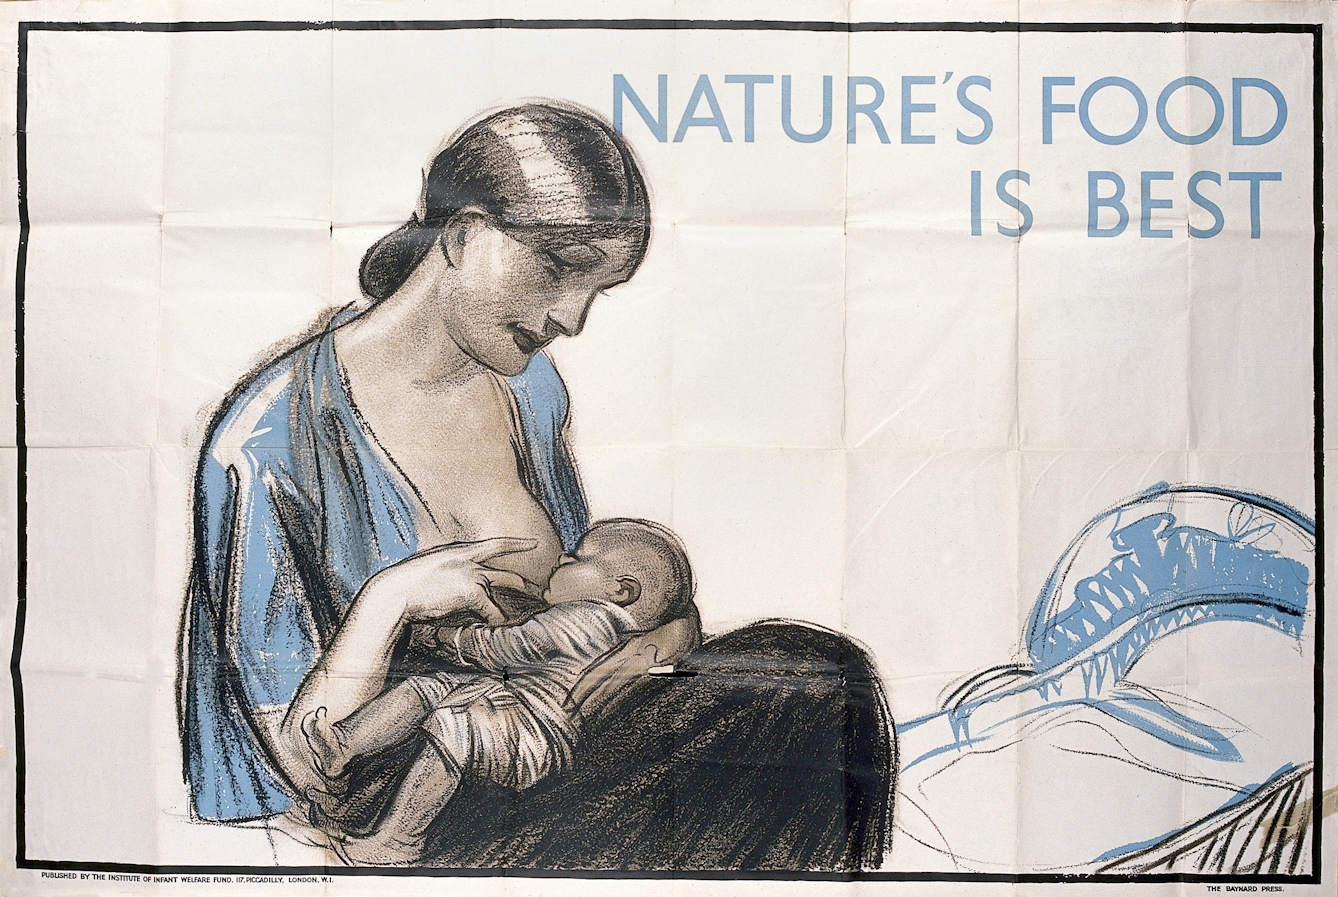 Poster of a woman breastfeeding a baby